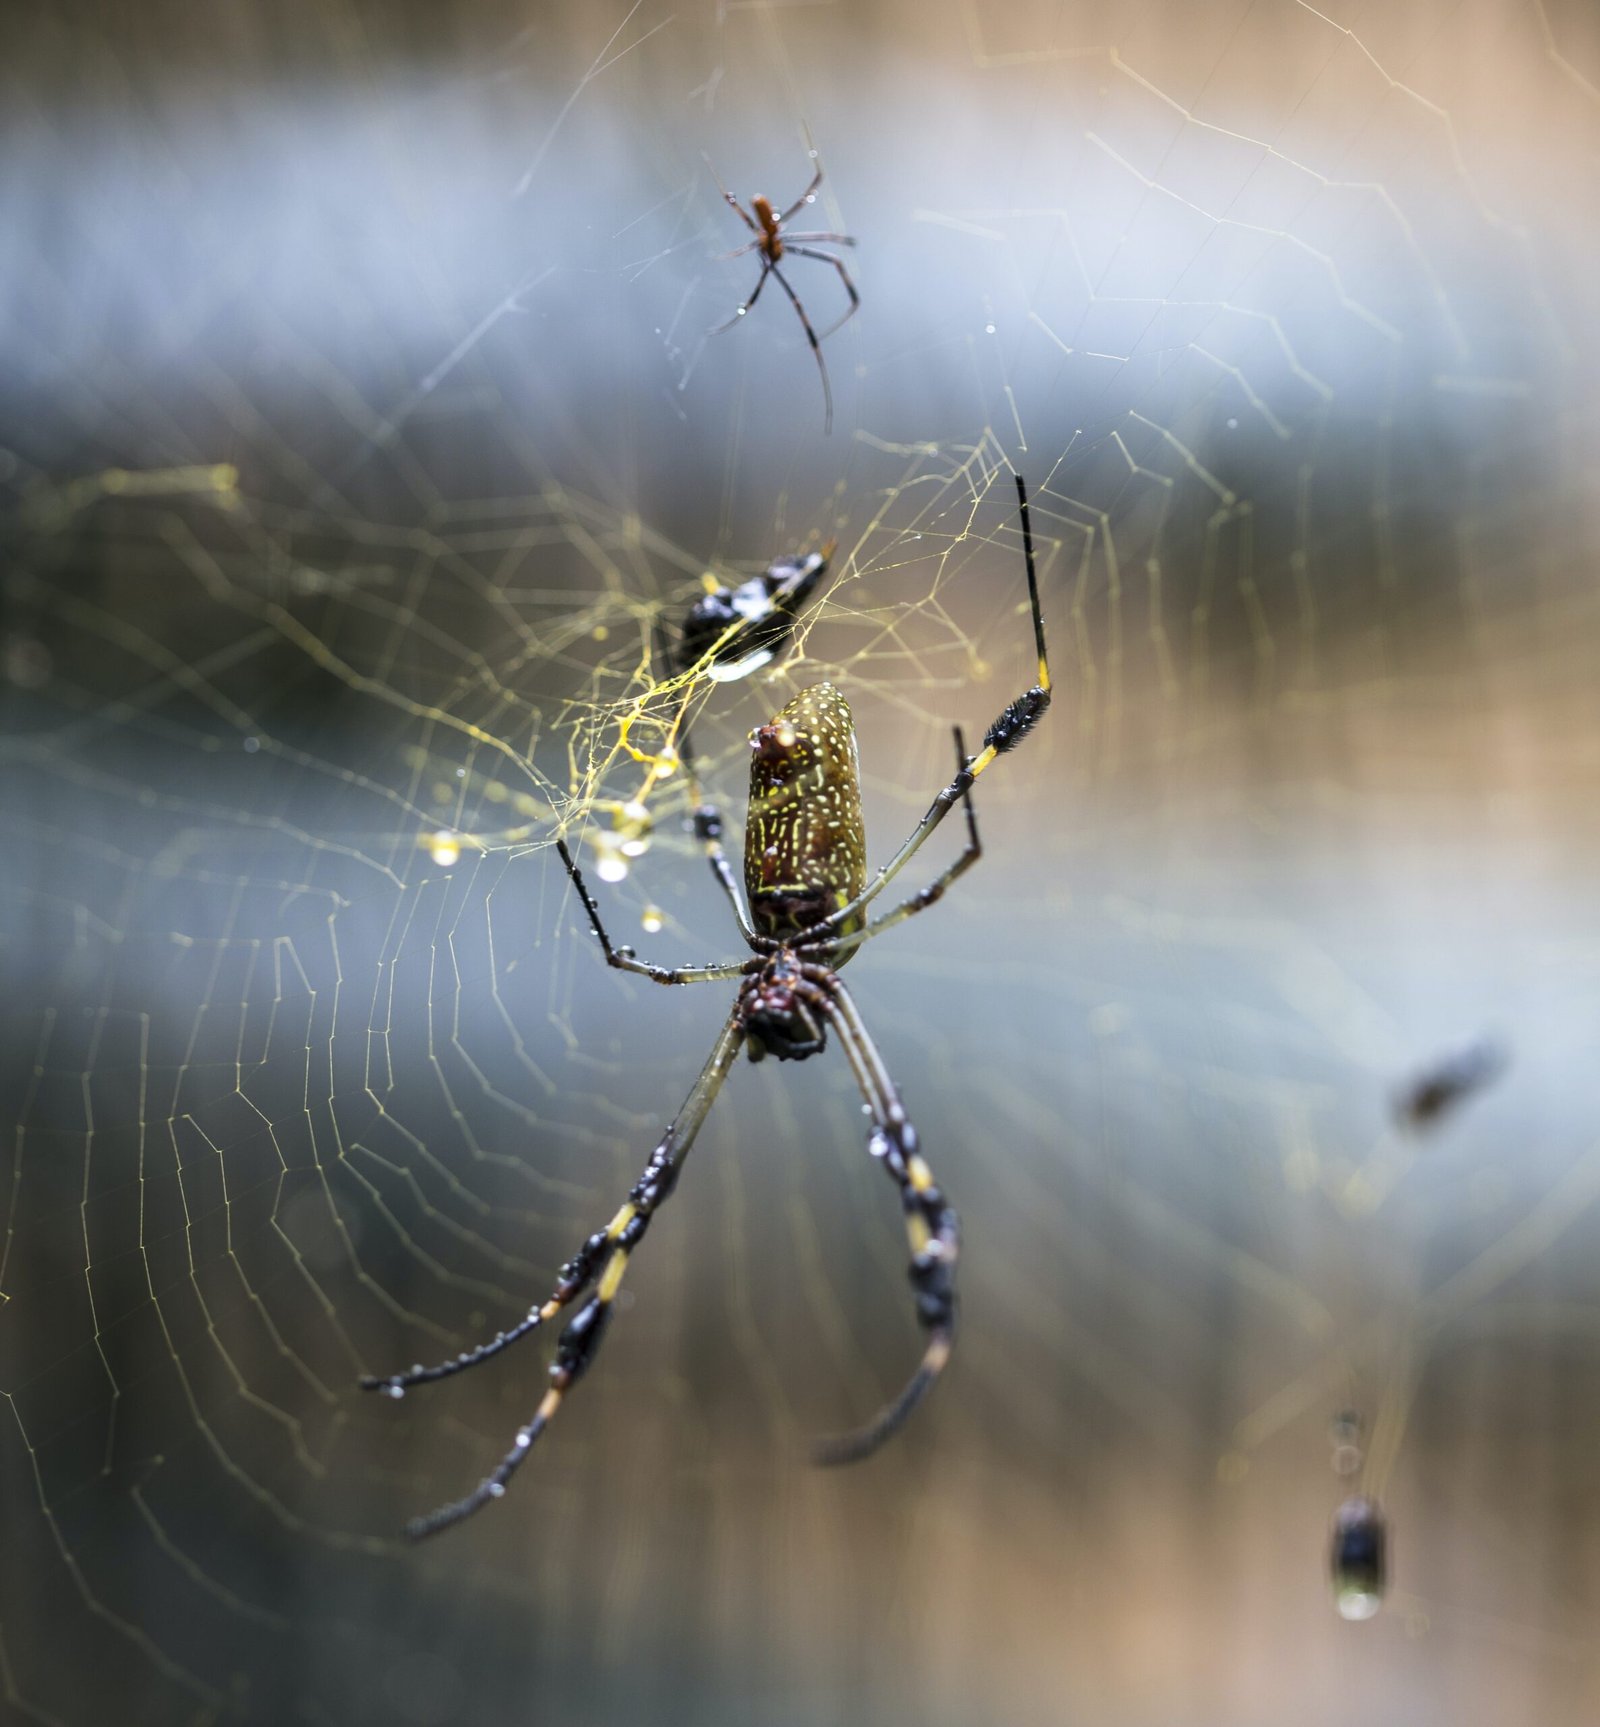 Can You Discuss The Characteristics And Care Requirements Of The Elusive Golden Orb-weaver Spider?